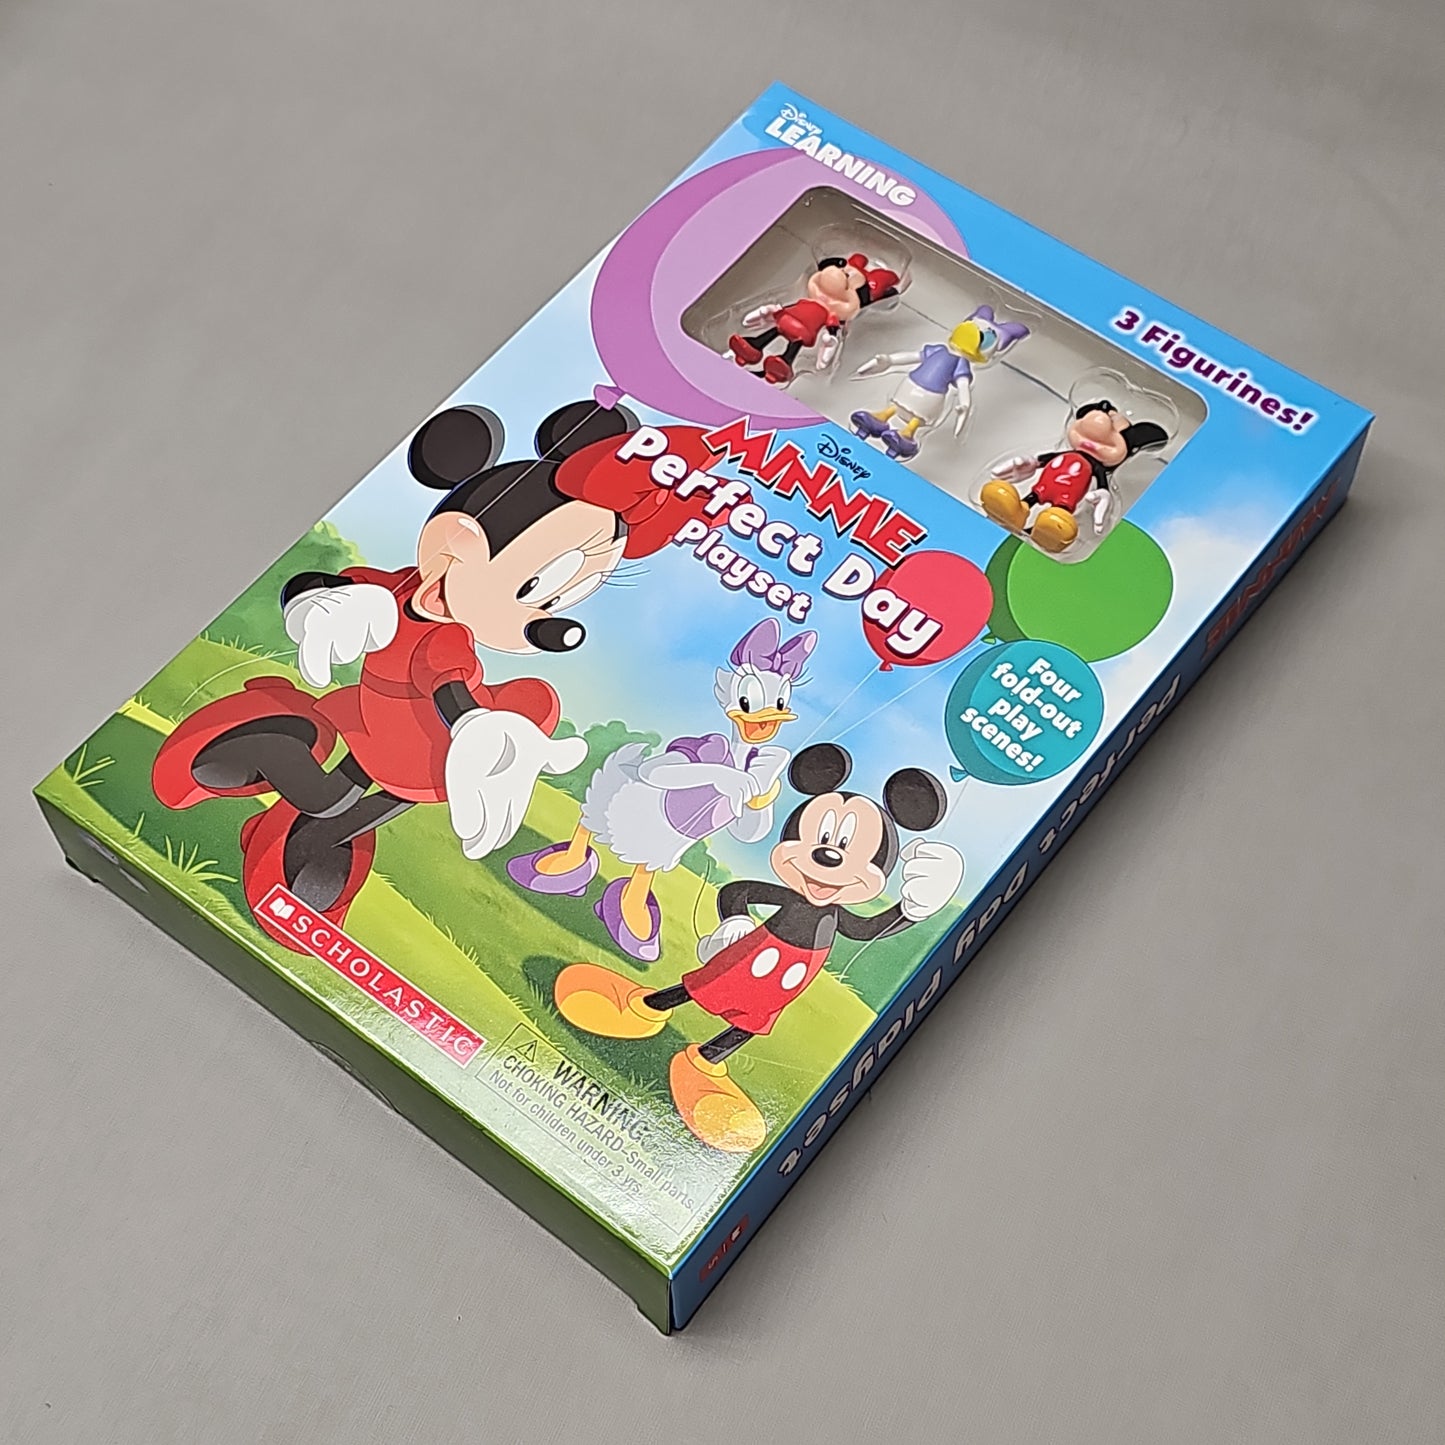 SCHOLASTIC DISNEY Minnie Perfect Day Playset With Book & Figurines (New)